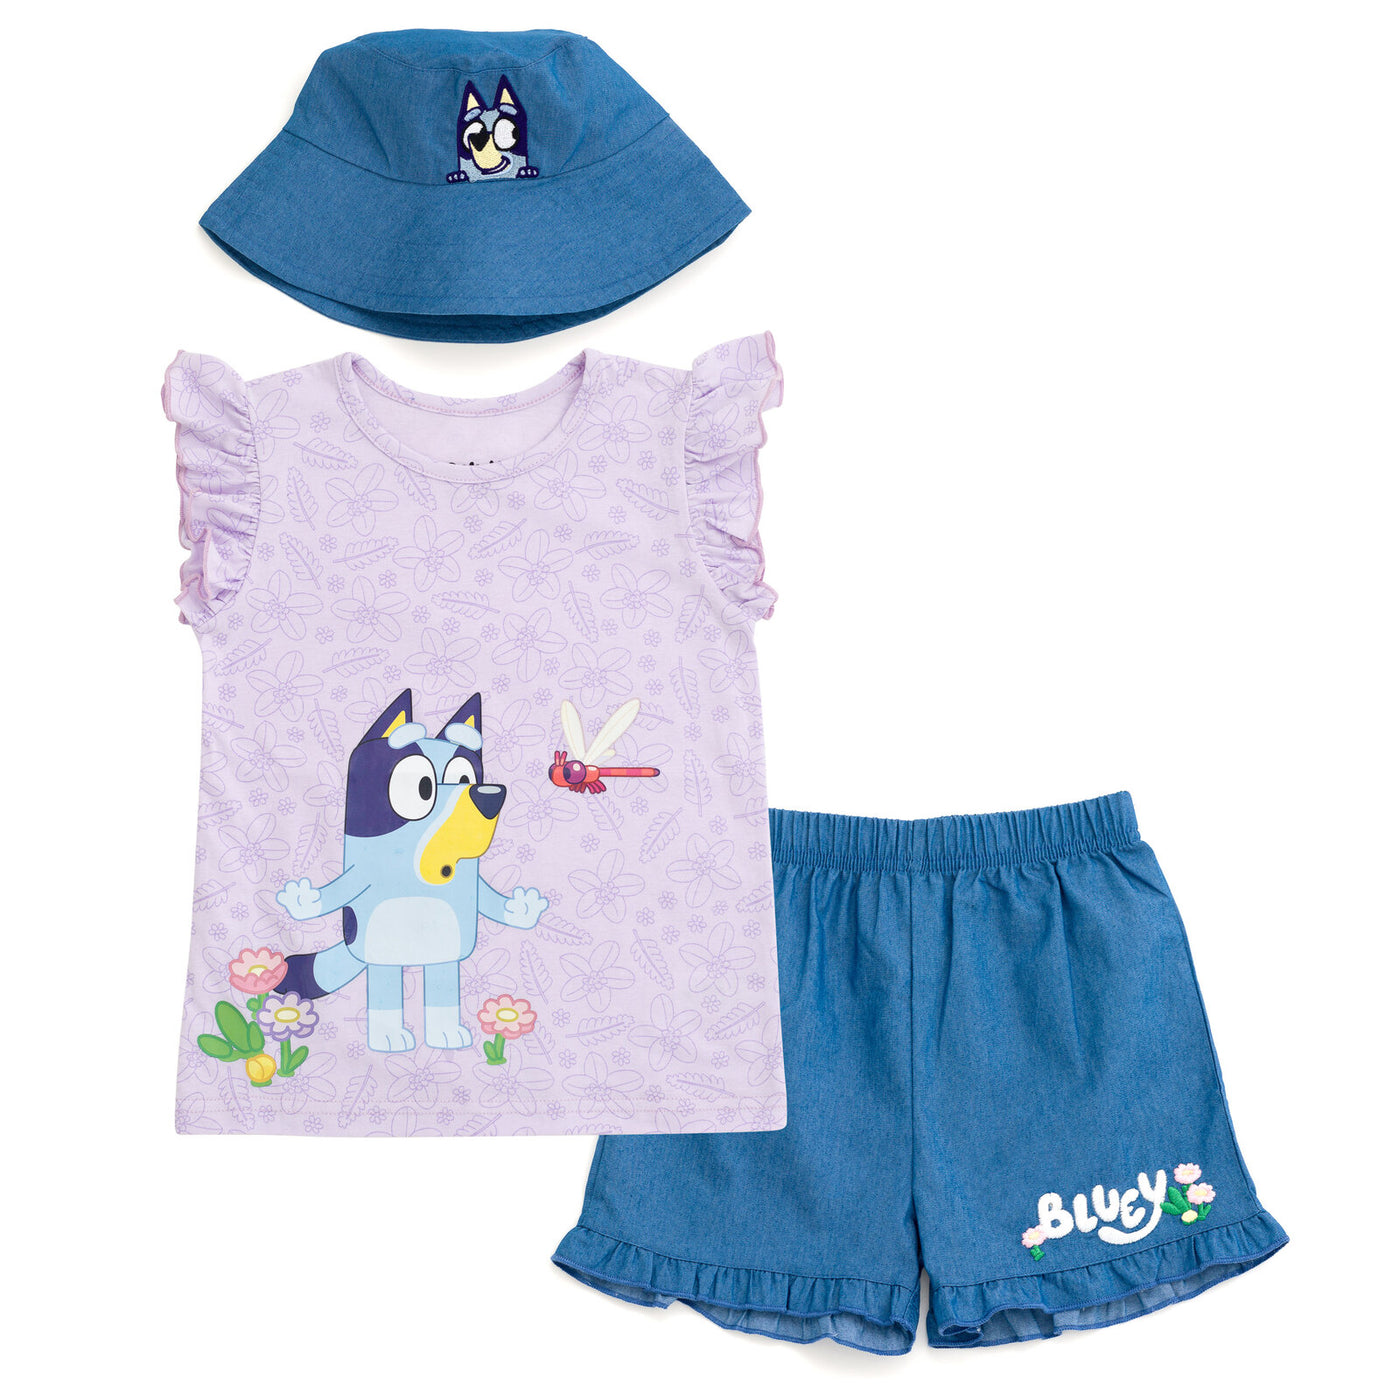 Bluey Tank Top Chambray Shorts and Bucket Sun Hat 3 Piece Outfit Set